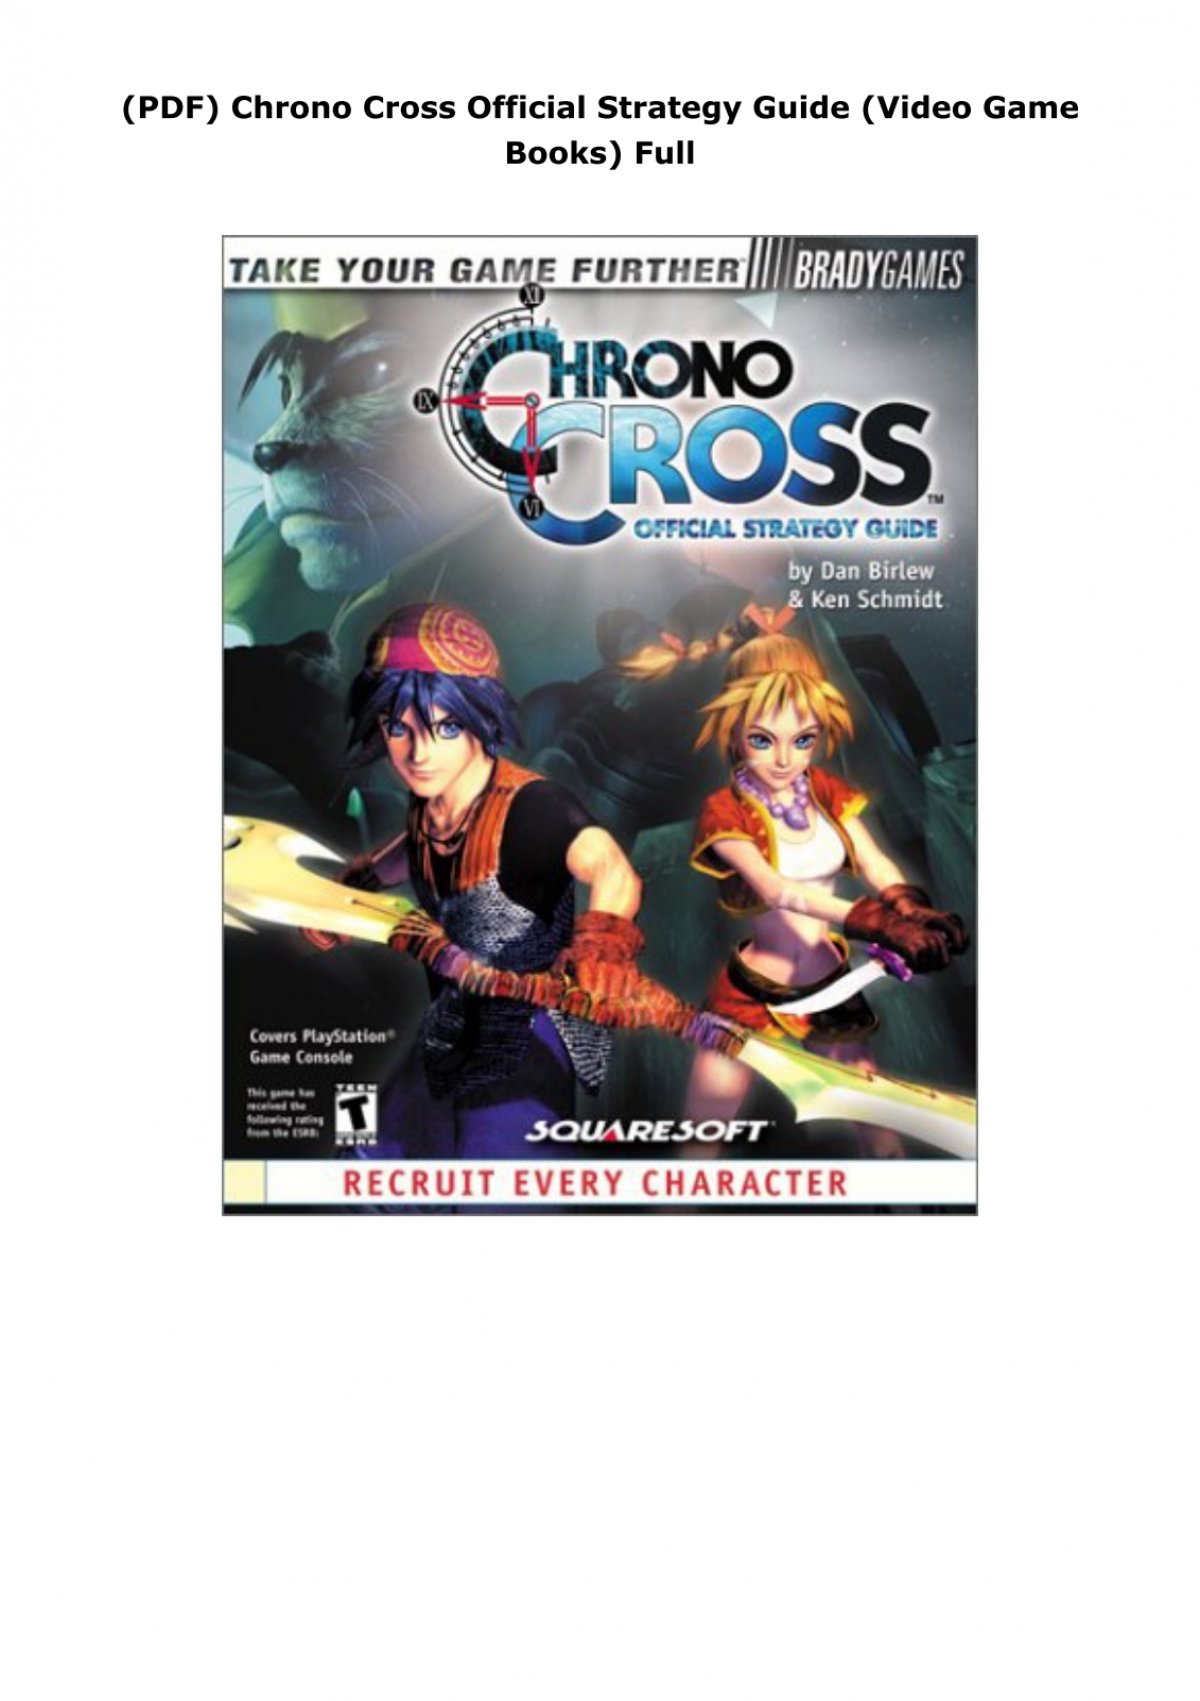 Guide to the Combat System and Mechanics of Chrono Cross - LevelSkip